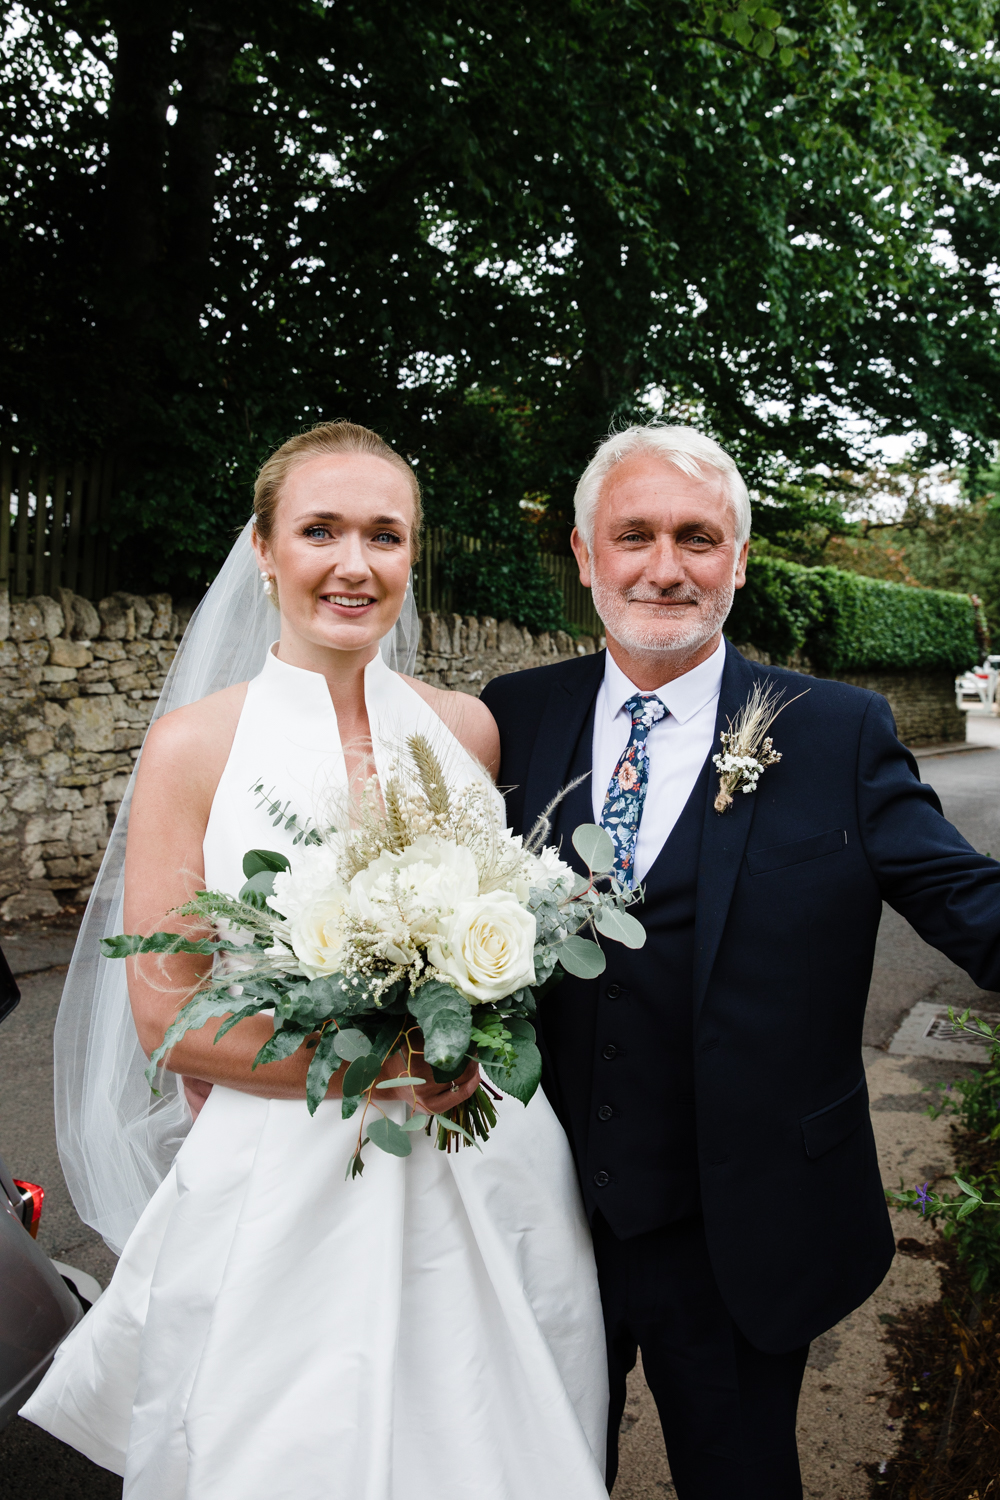 A bride and her father pose for a photograph before walking down the aisle